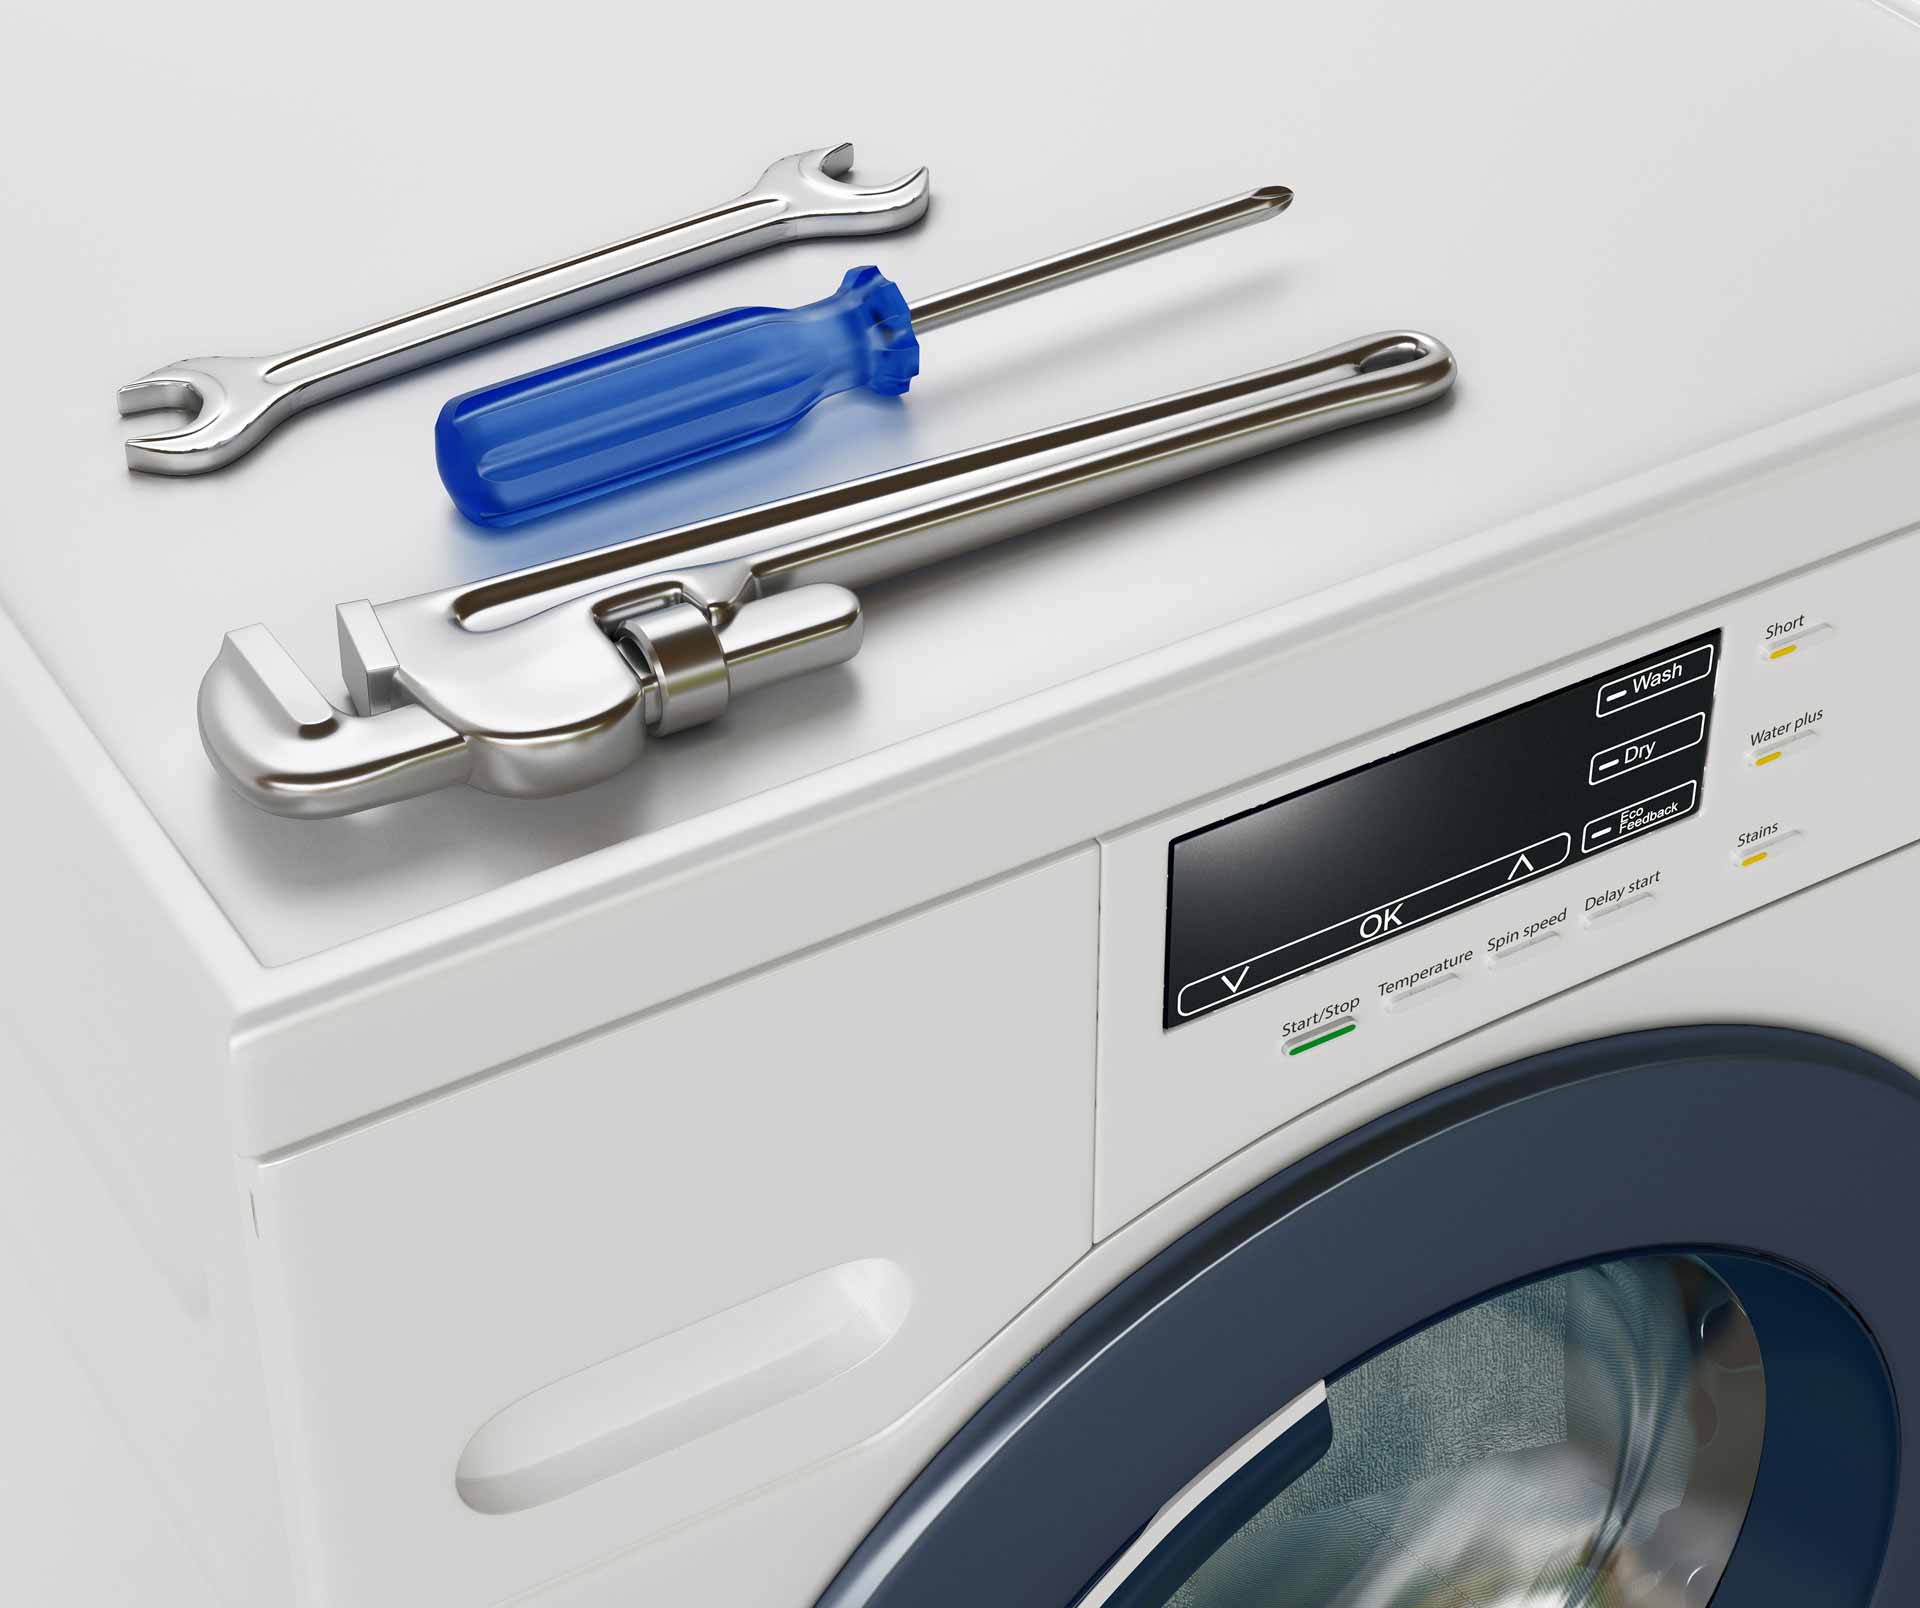 Two wrenches and a screwdriver on top of a washer/dryer